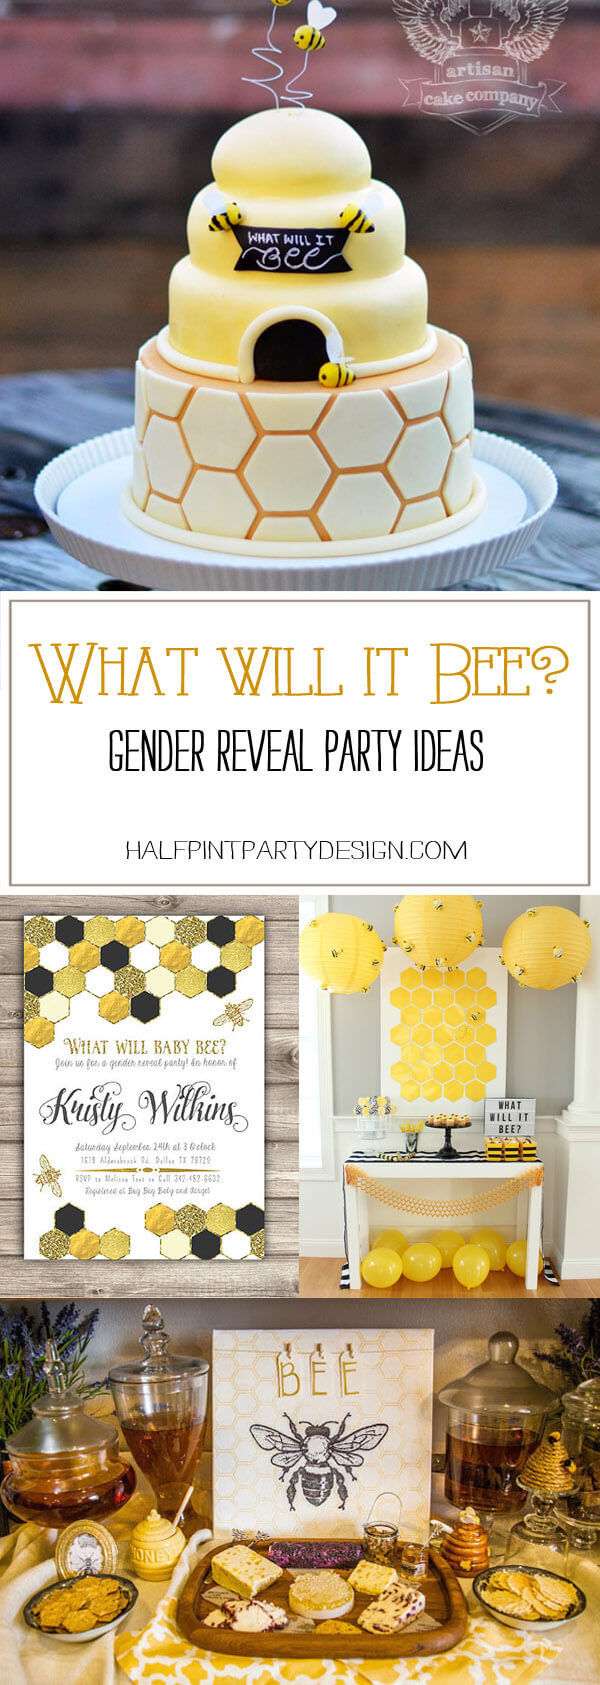 Small Gender Reveal Party Ideas
 What Will it Bee Gender Reveal Party Ideas Parties With